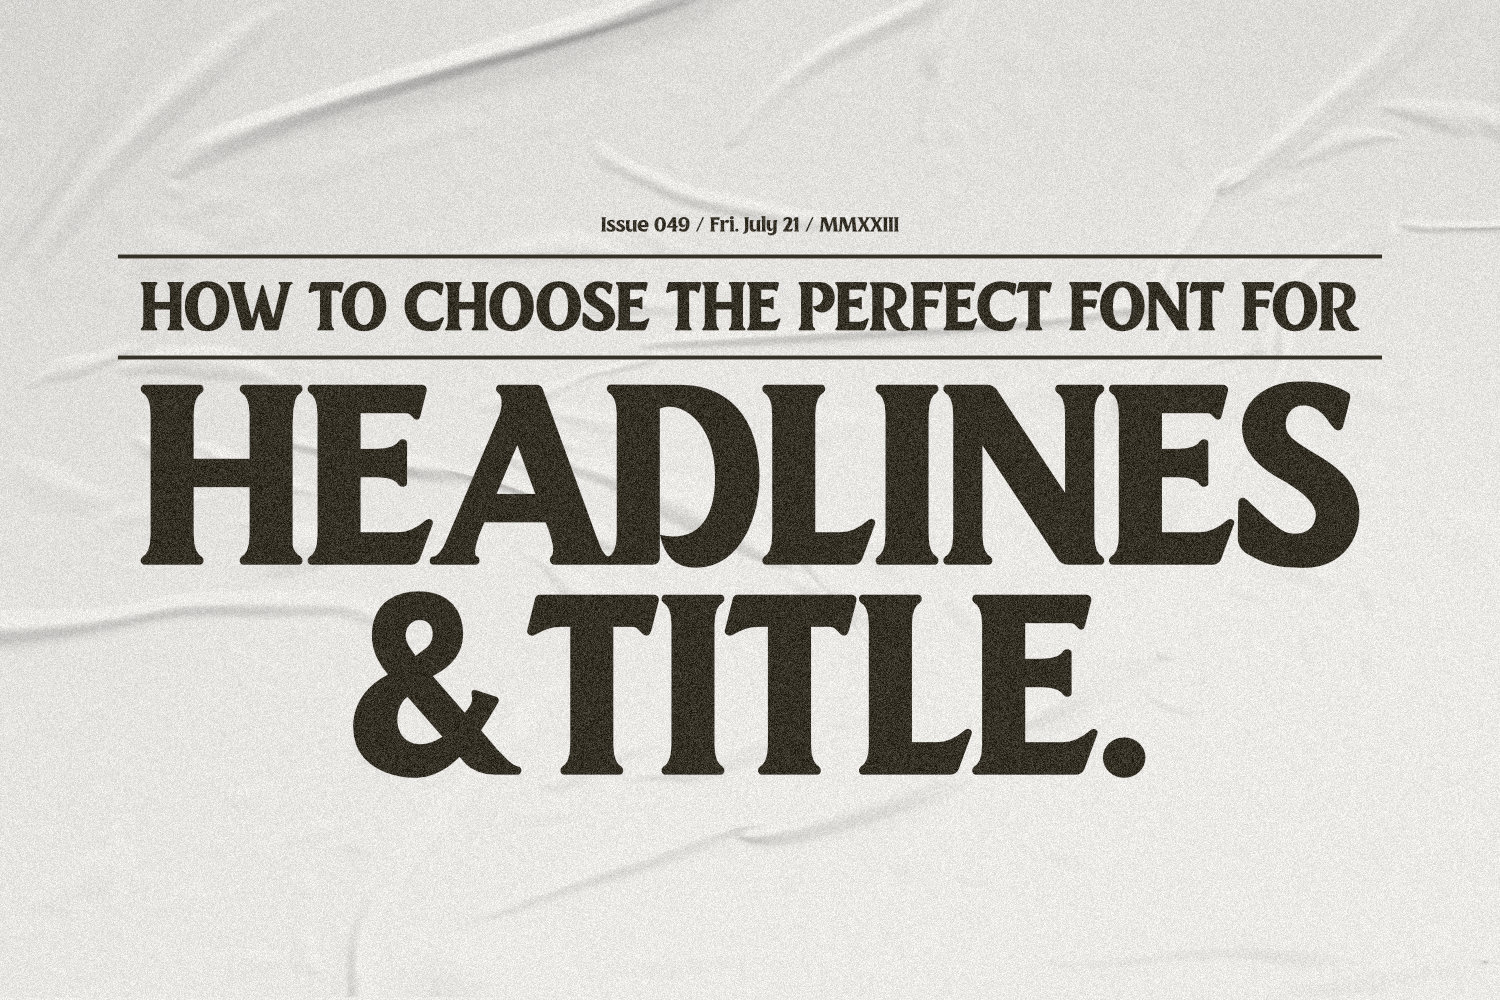 How to Choose the Perfect Font for Headlines & Title